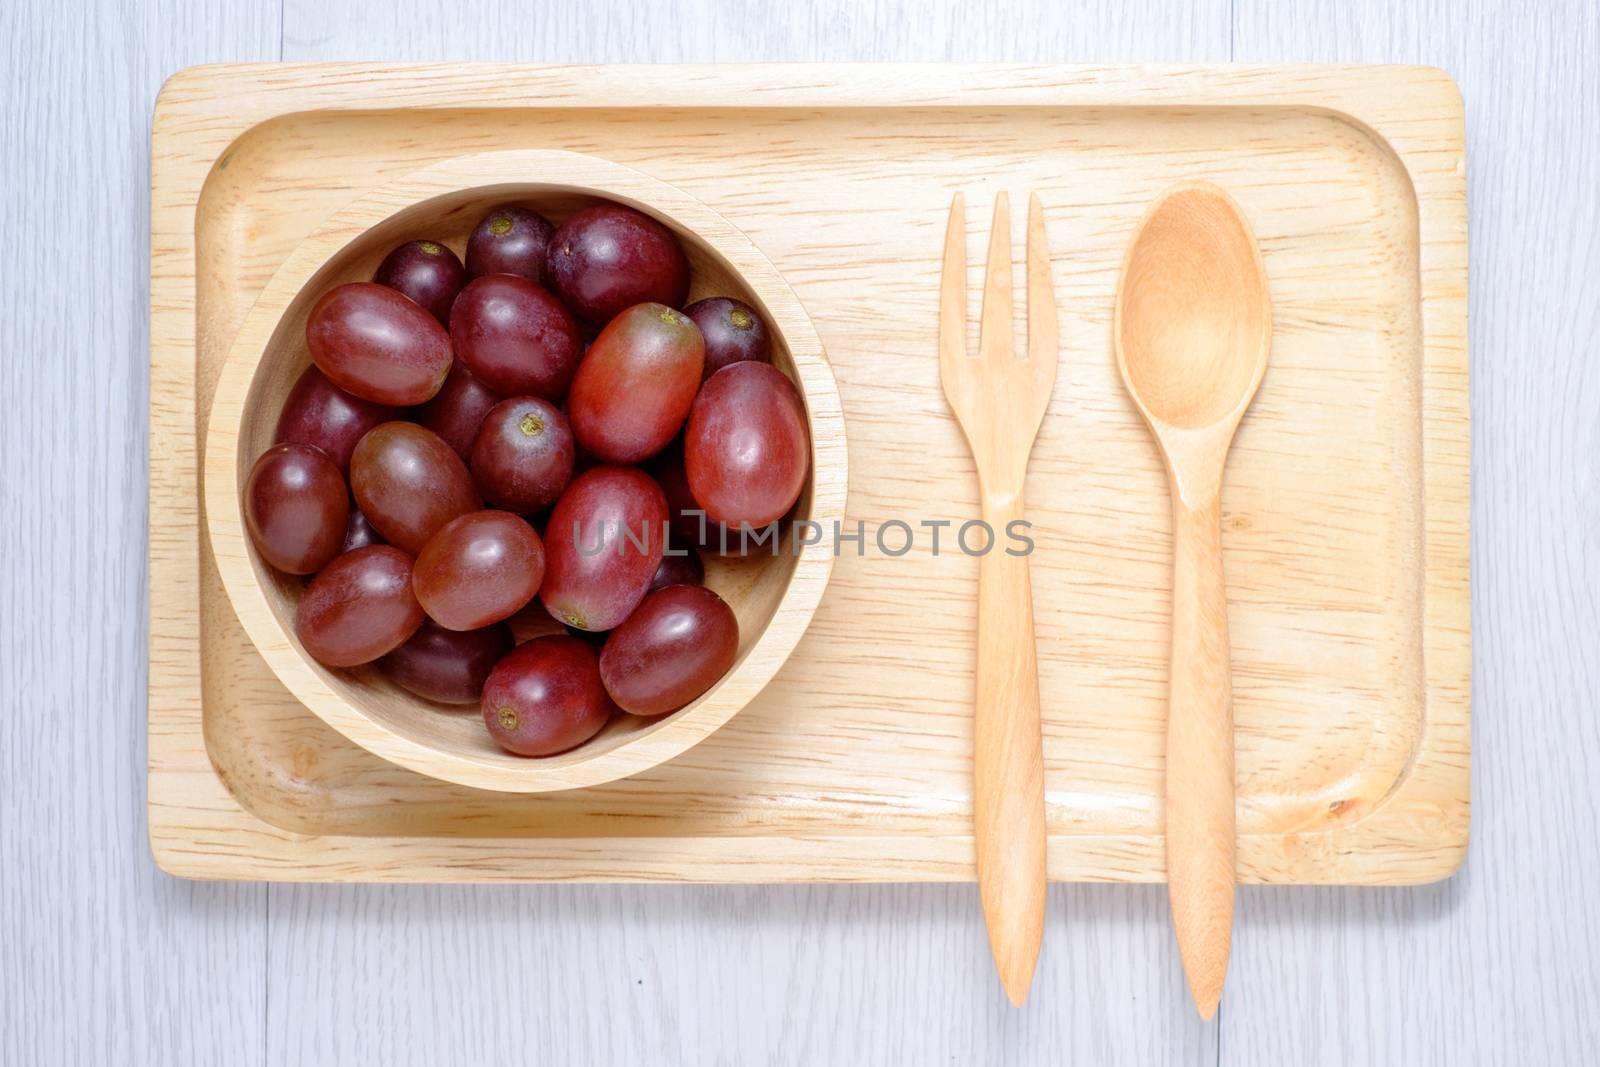 Red grapes in wooden bowl and spoon. they on white wooden table. Clear light